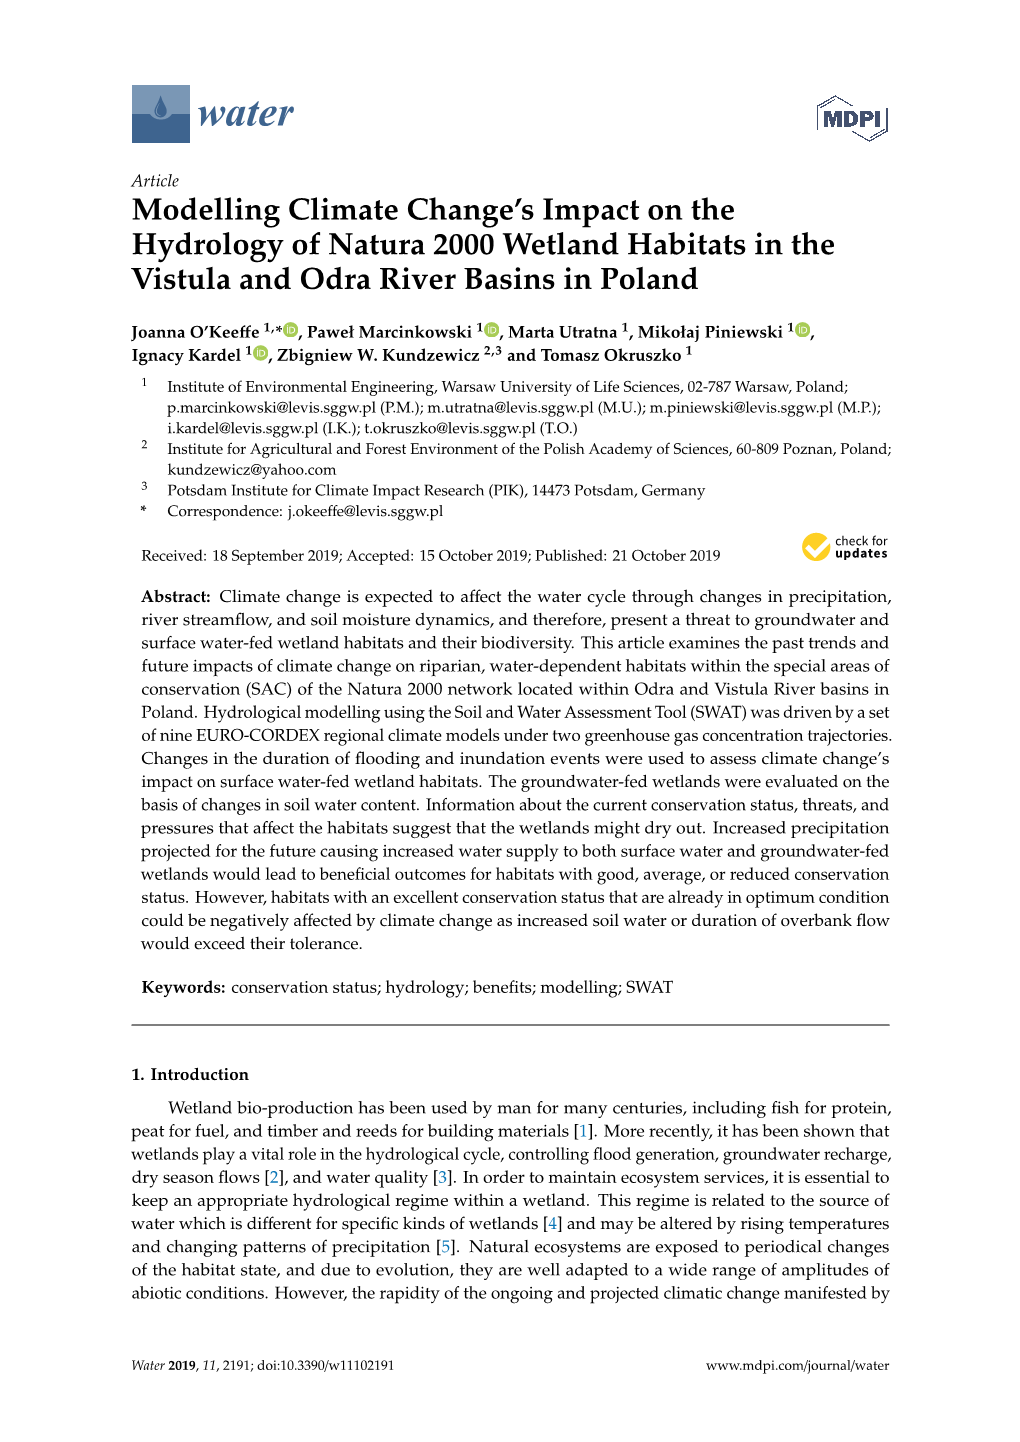 Modelling Climate Change's Impact on the Hydrology of Natura 2000